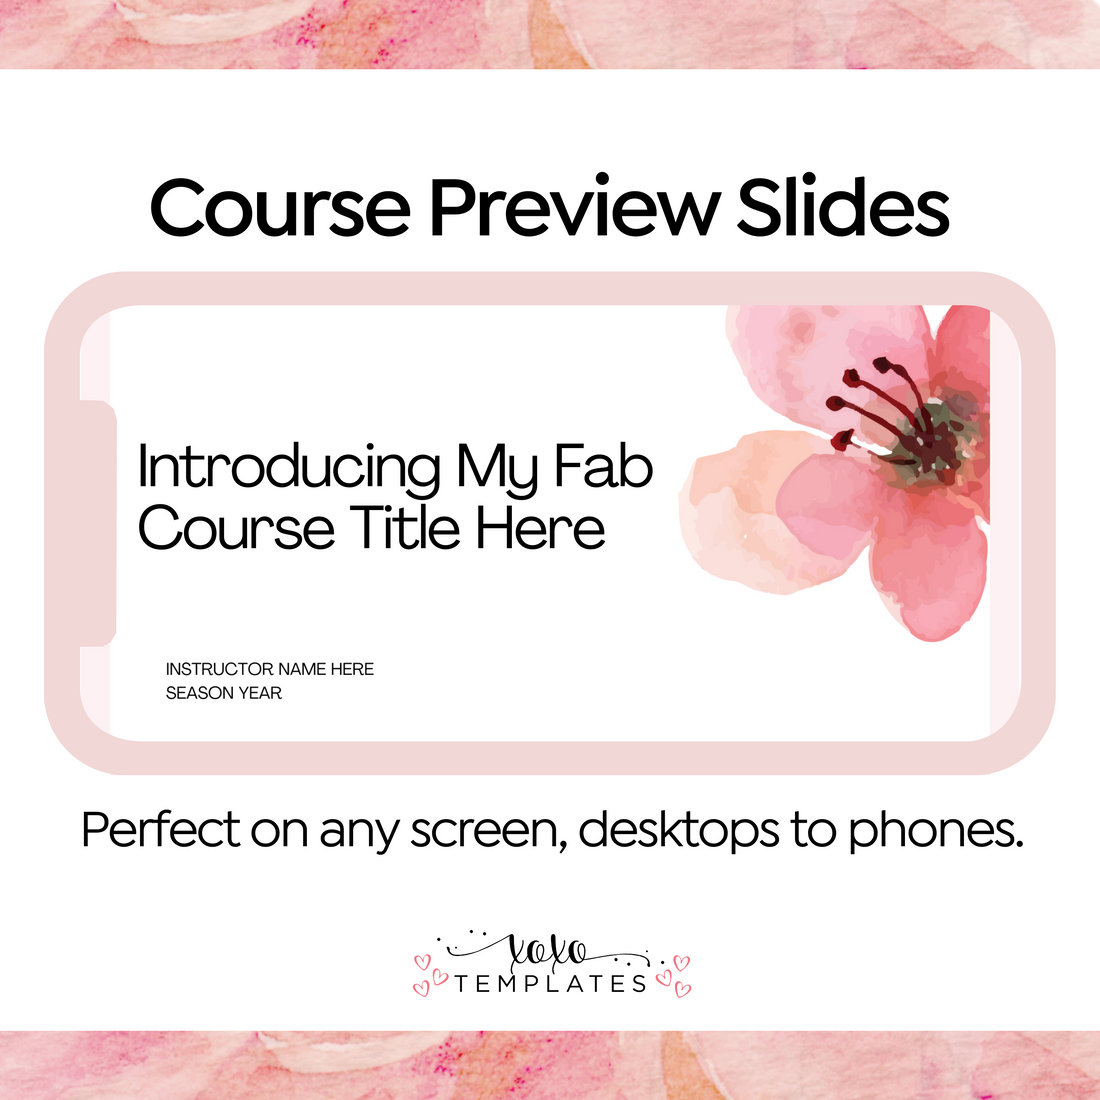 Course Preview Slides: Pink